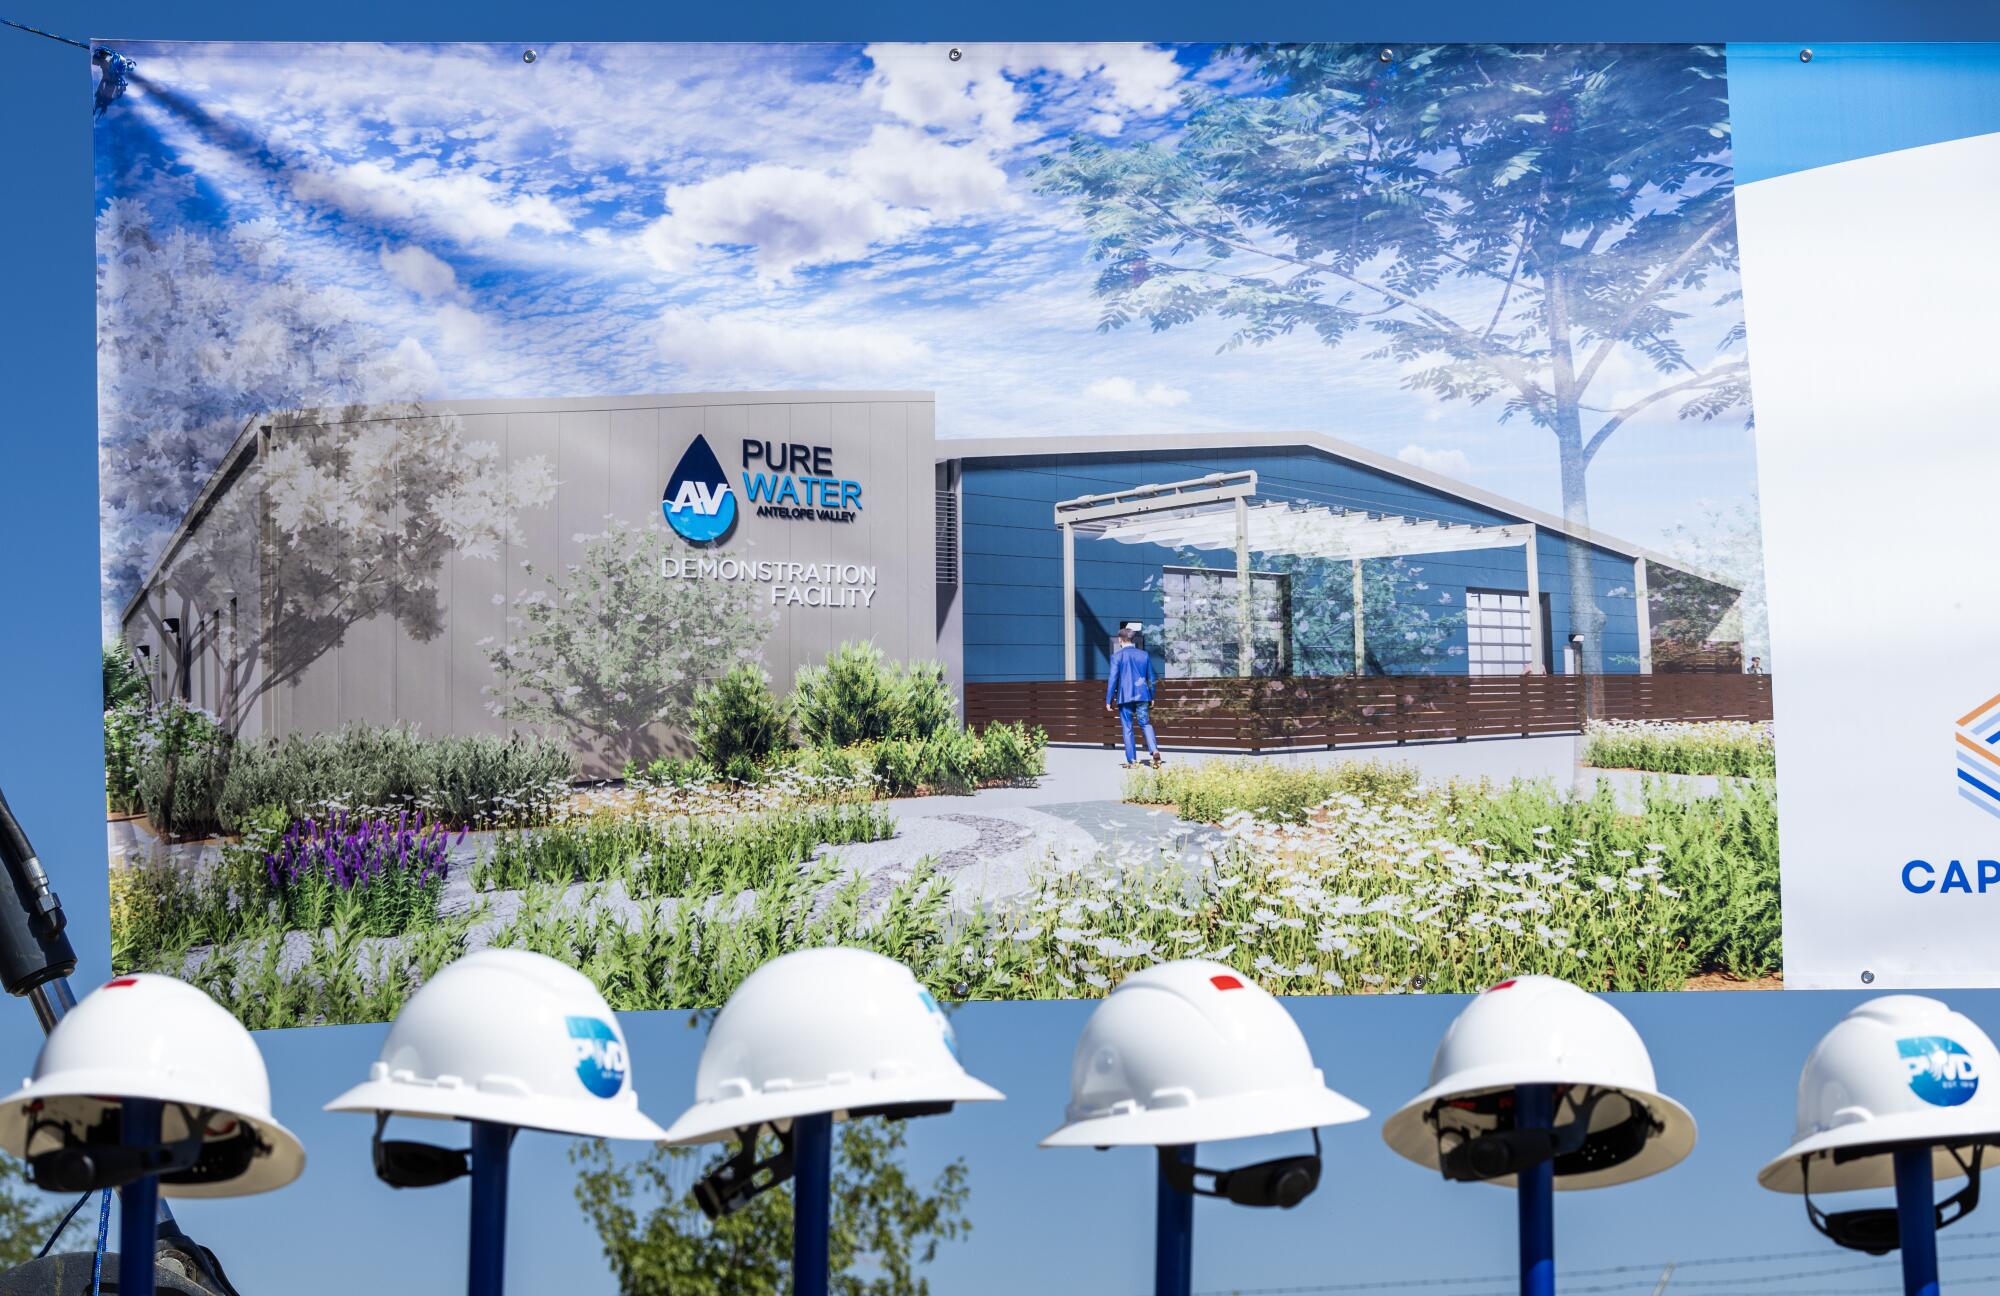 A rendering of Project Monarch facilities behind several white hard hats.